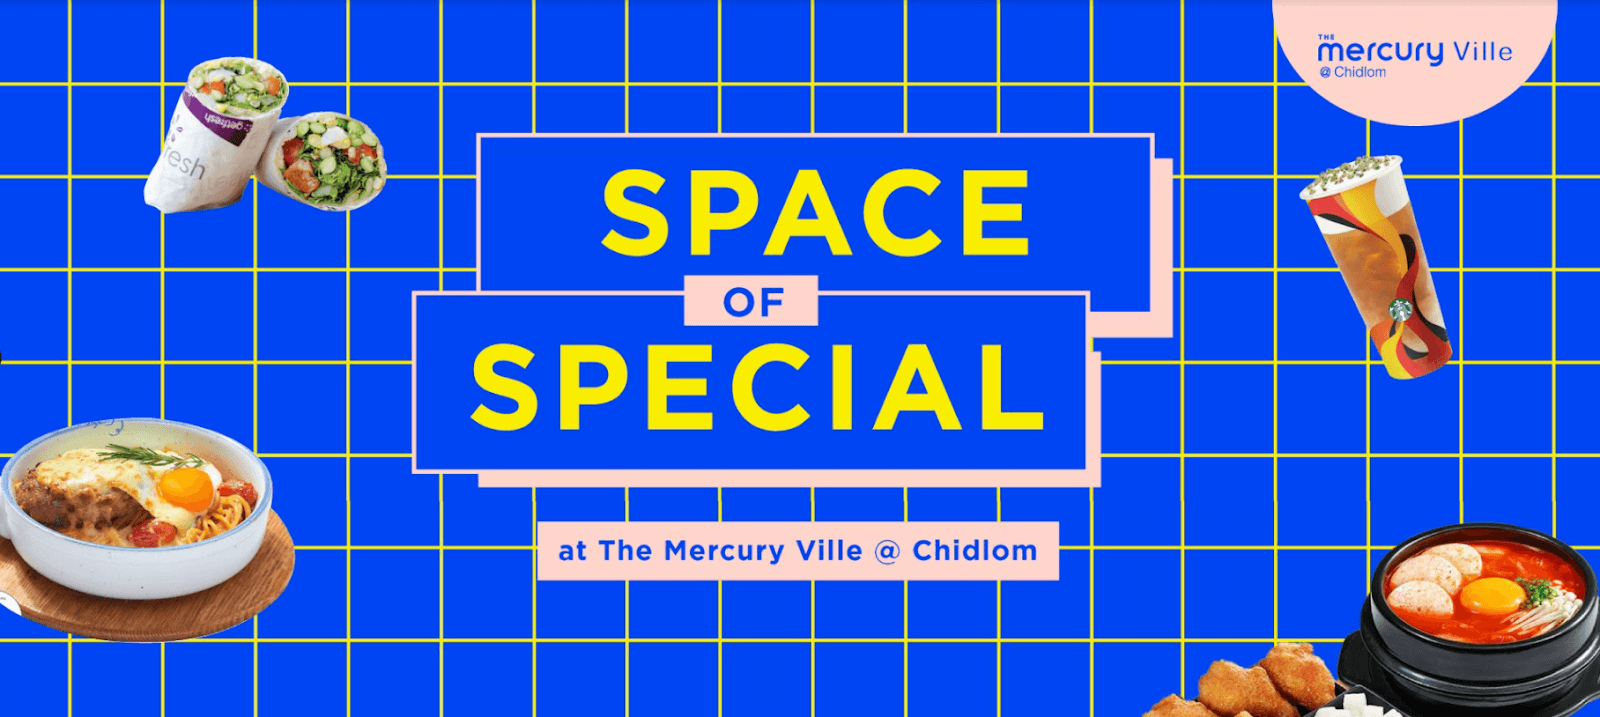 Space of Special at The Mercury Ville